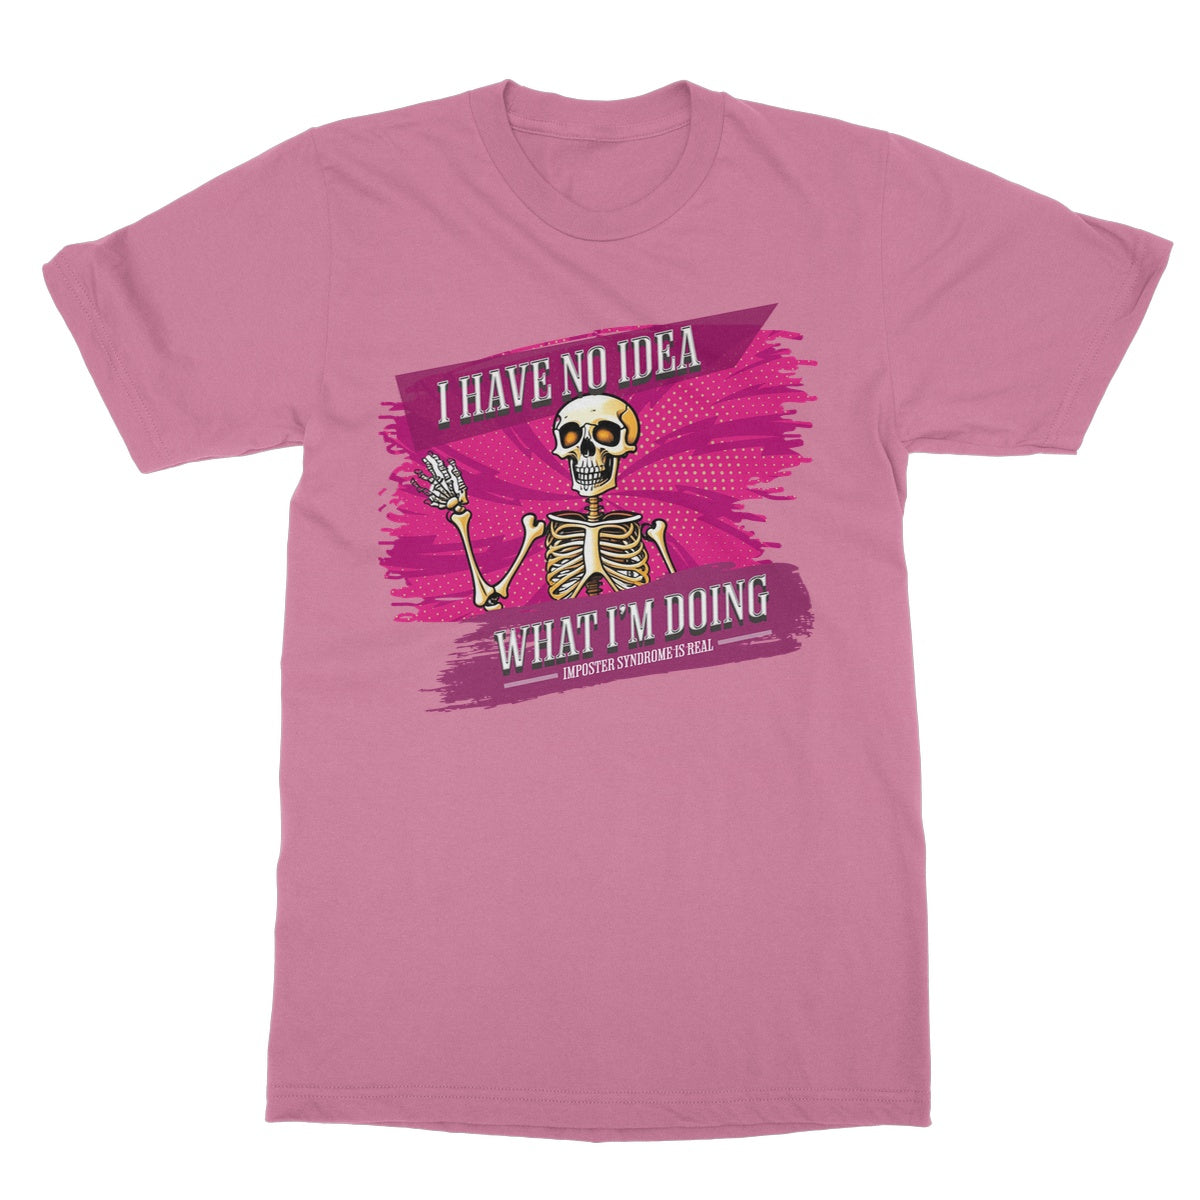 I have no idea what I am doing t shirt pink